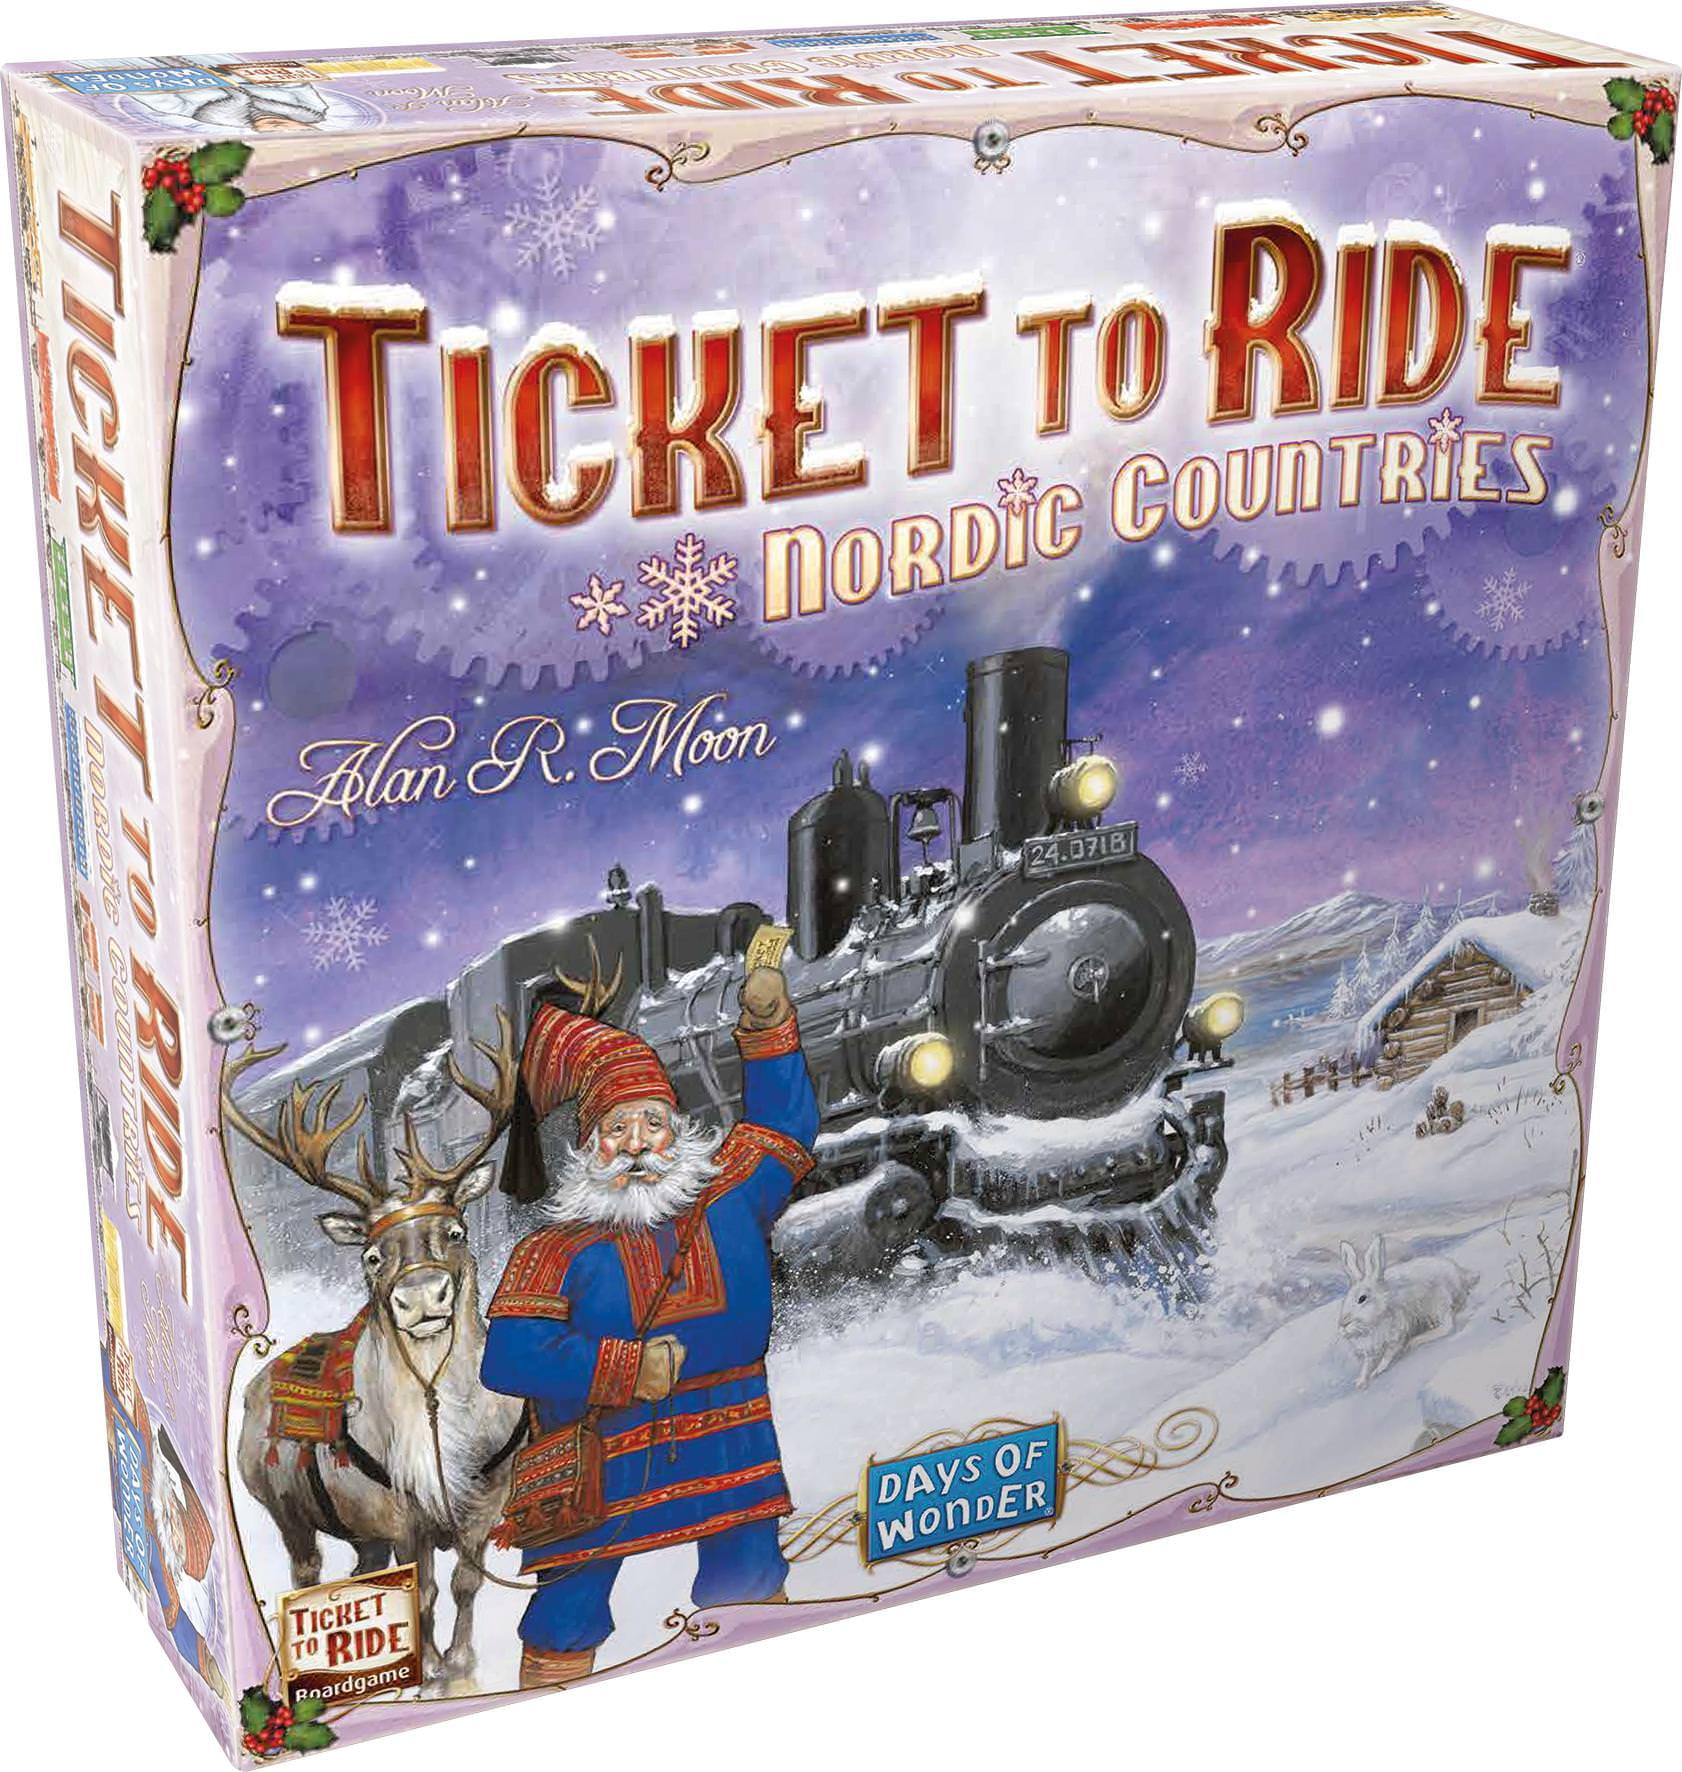 1x Ticket to Ride Nordic Countries Board Games for sale online 